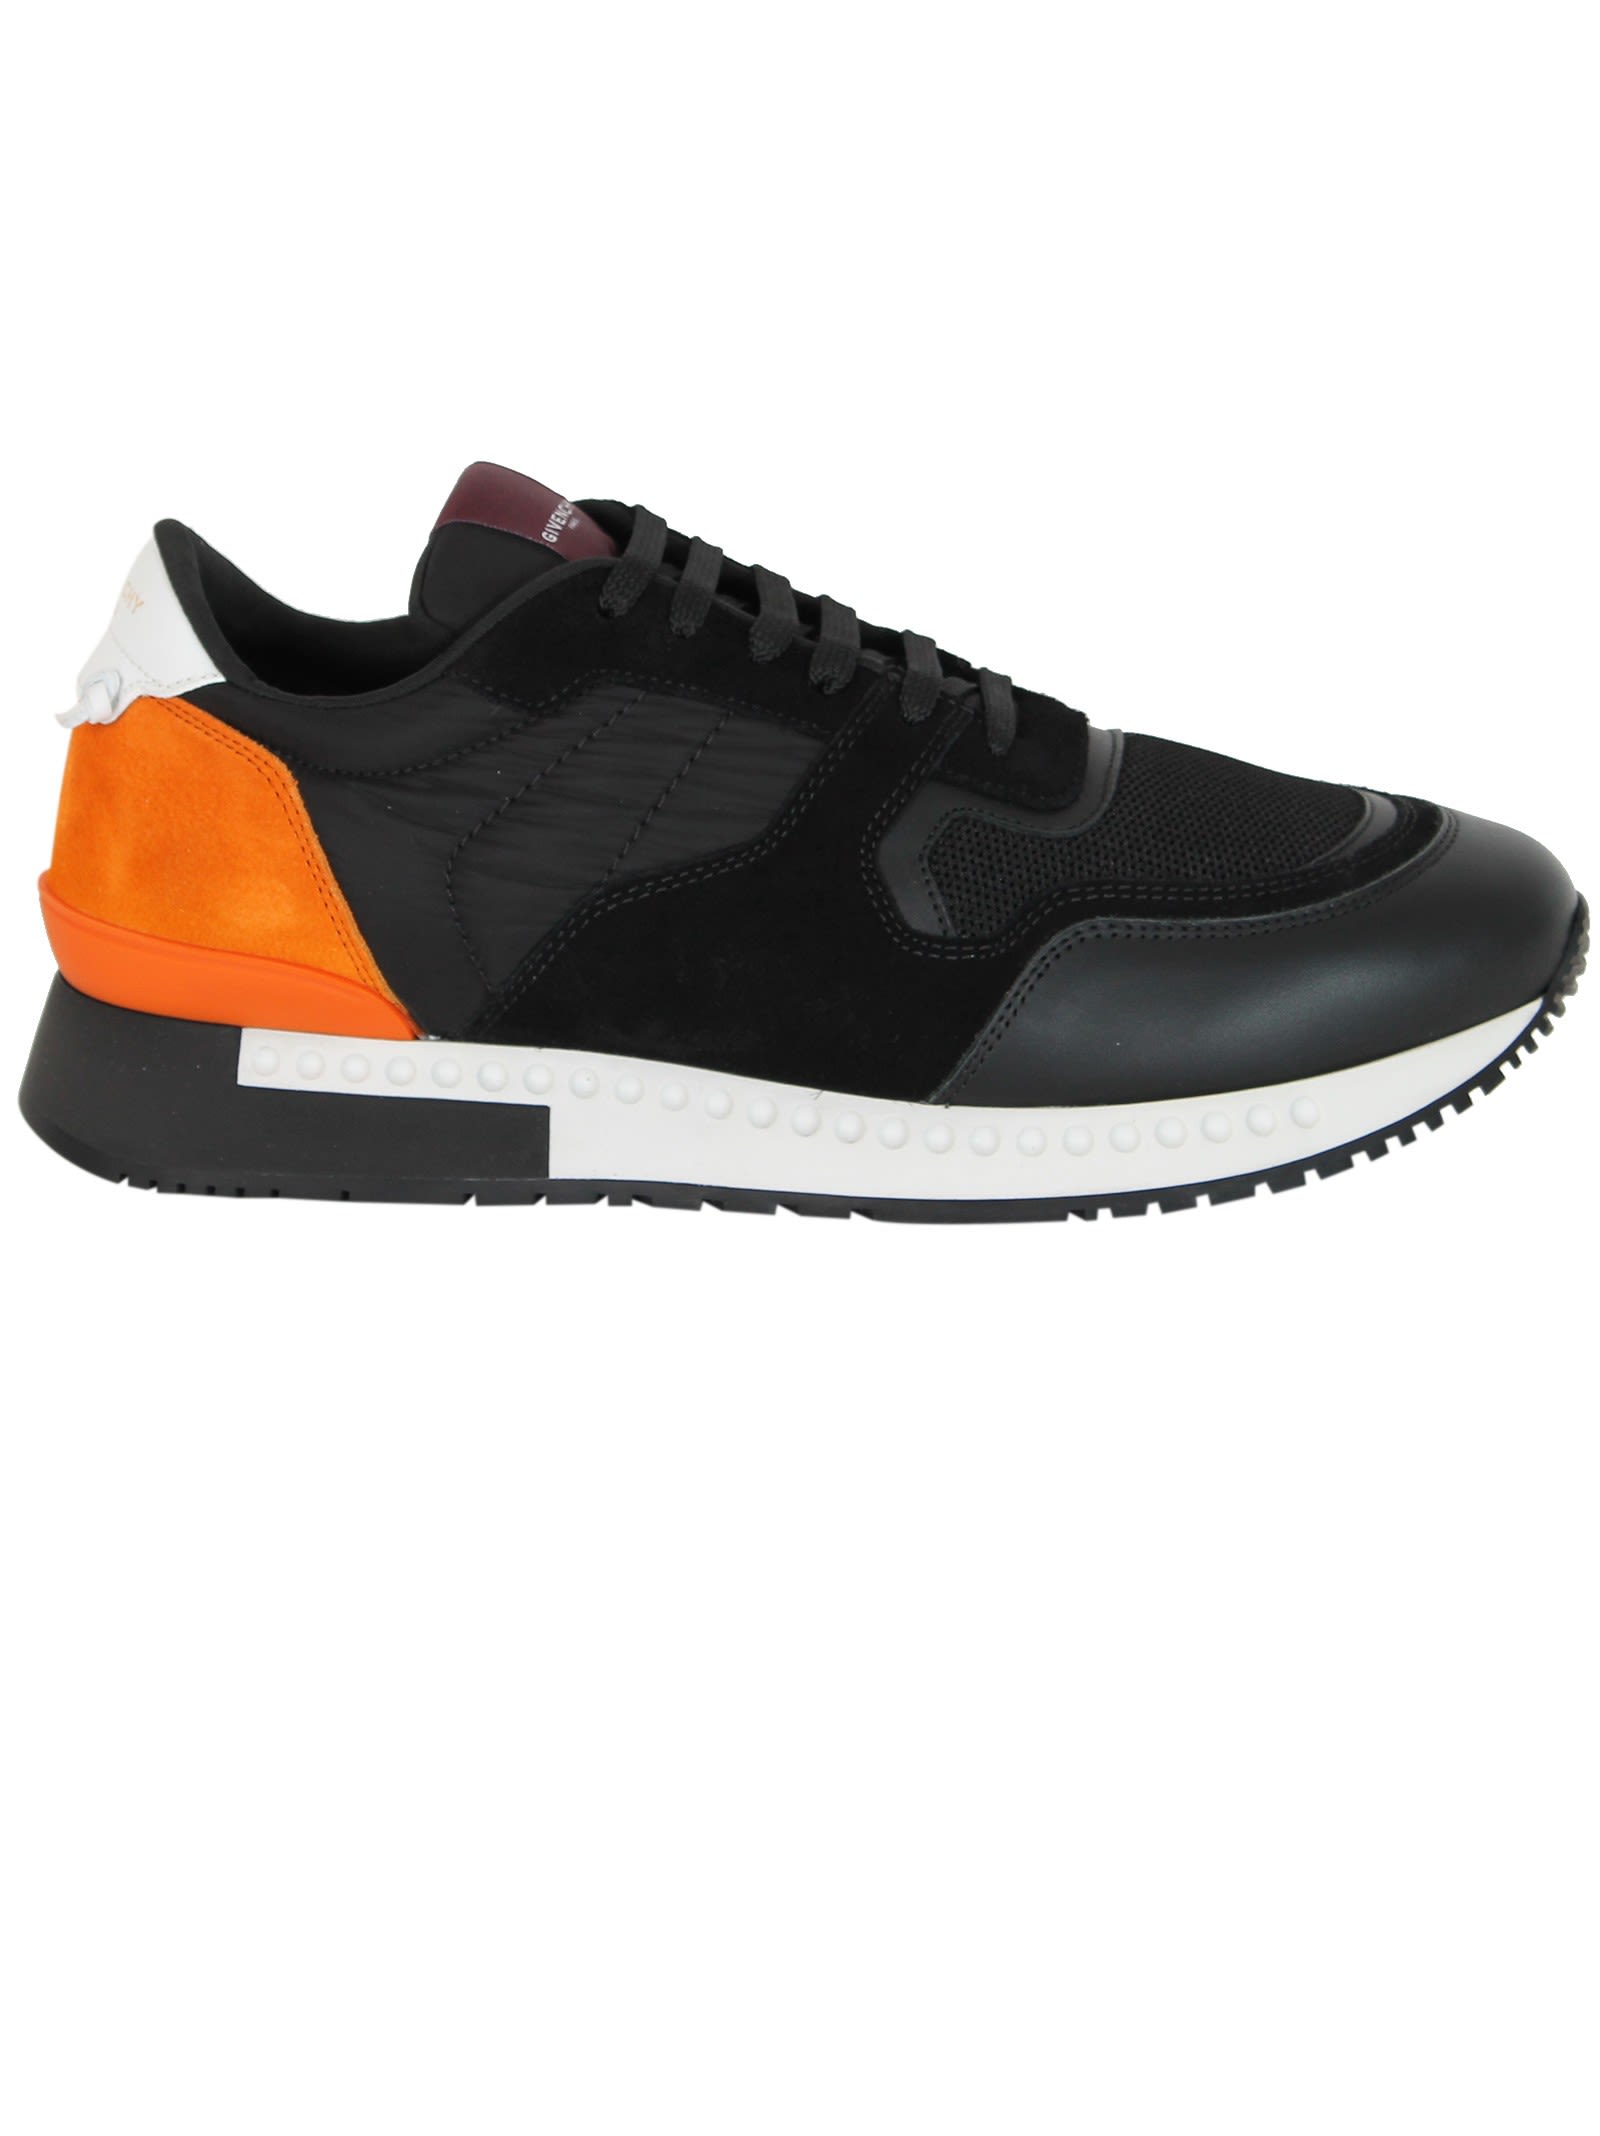 GIVENCHY ACTIVE RUNNER SUEDE-TRIMMED MESH SNEAKERS, BLACK & ORANGE ...